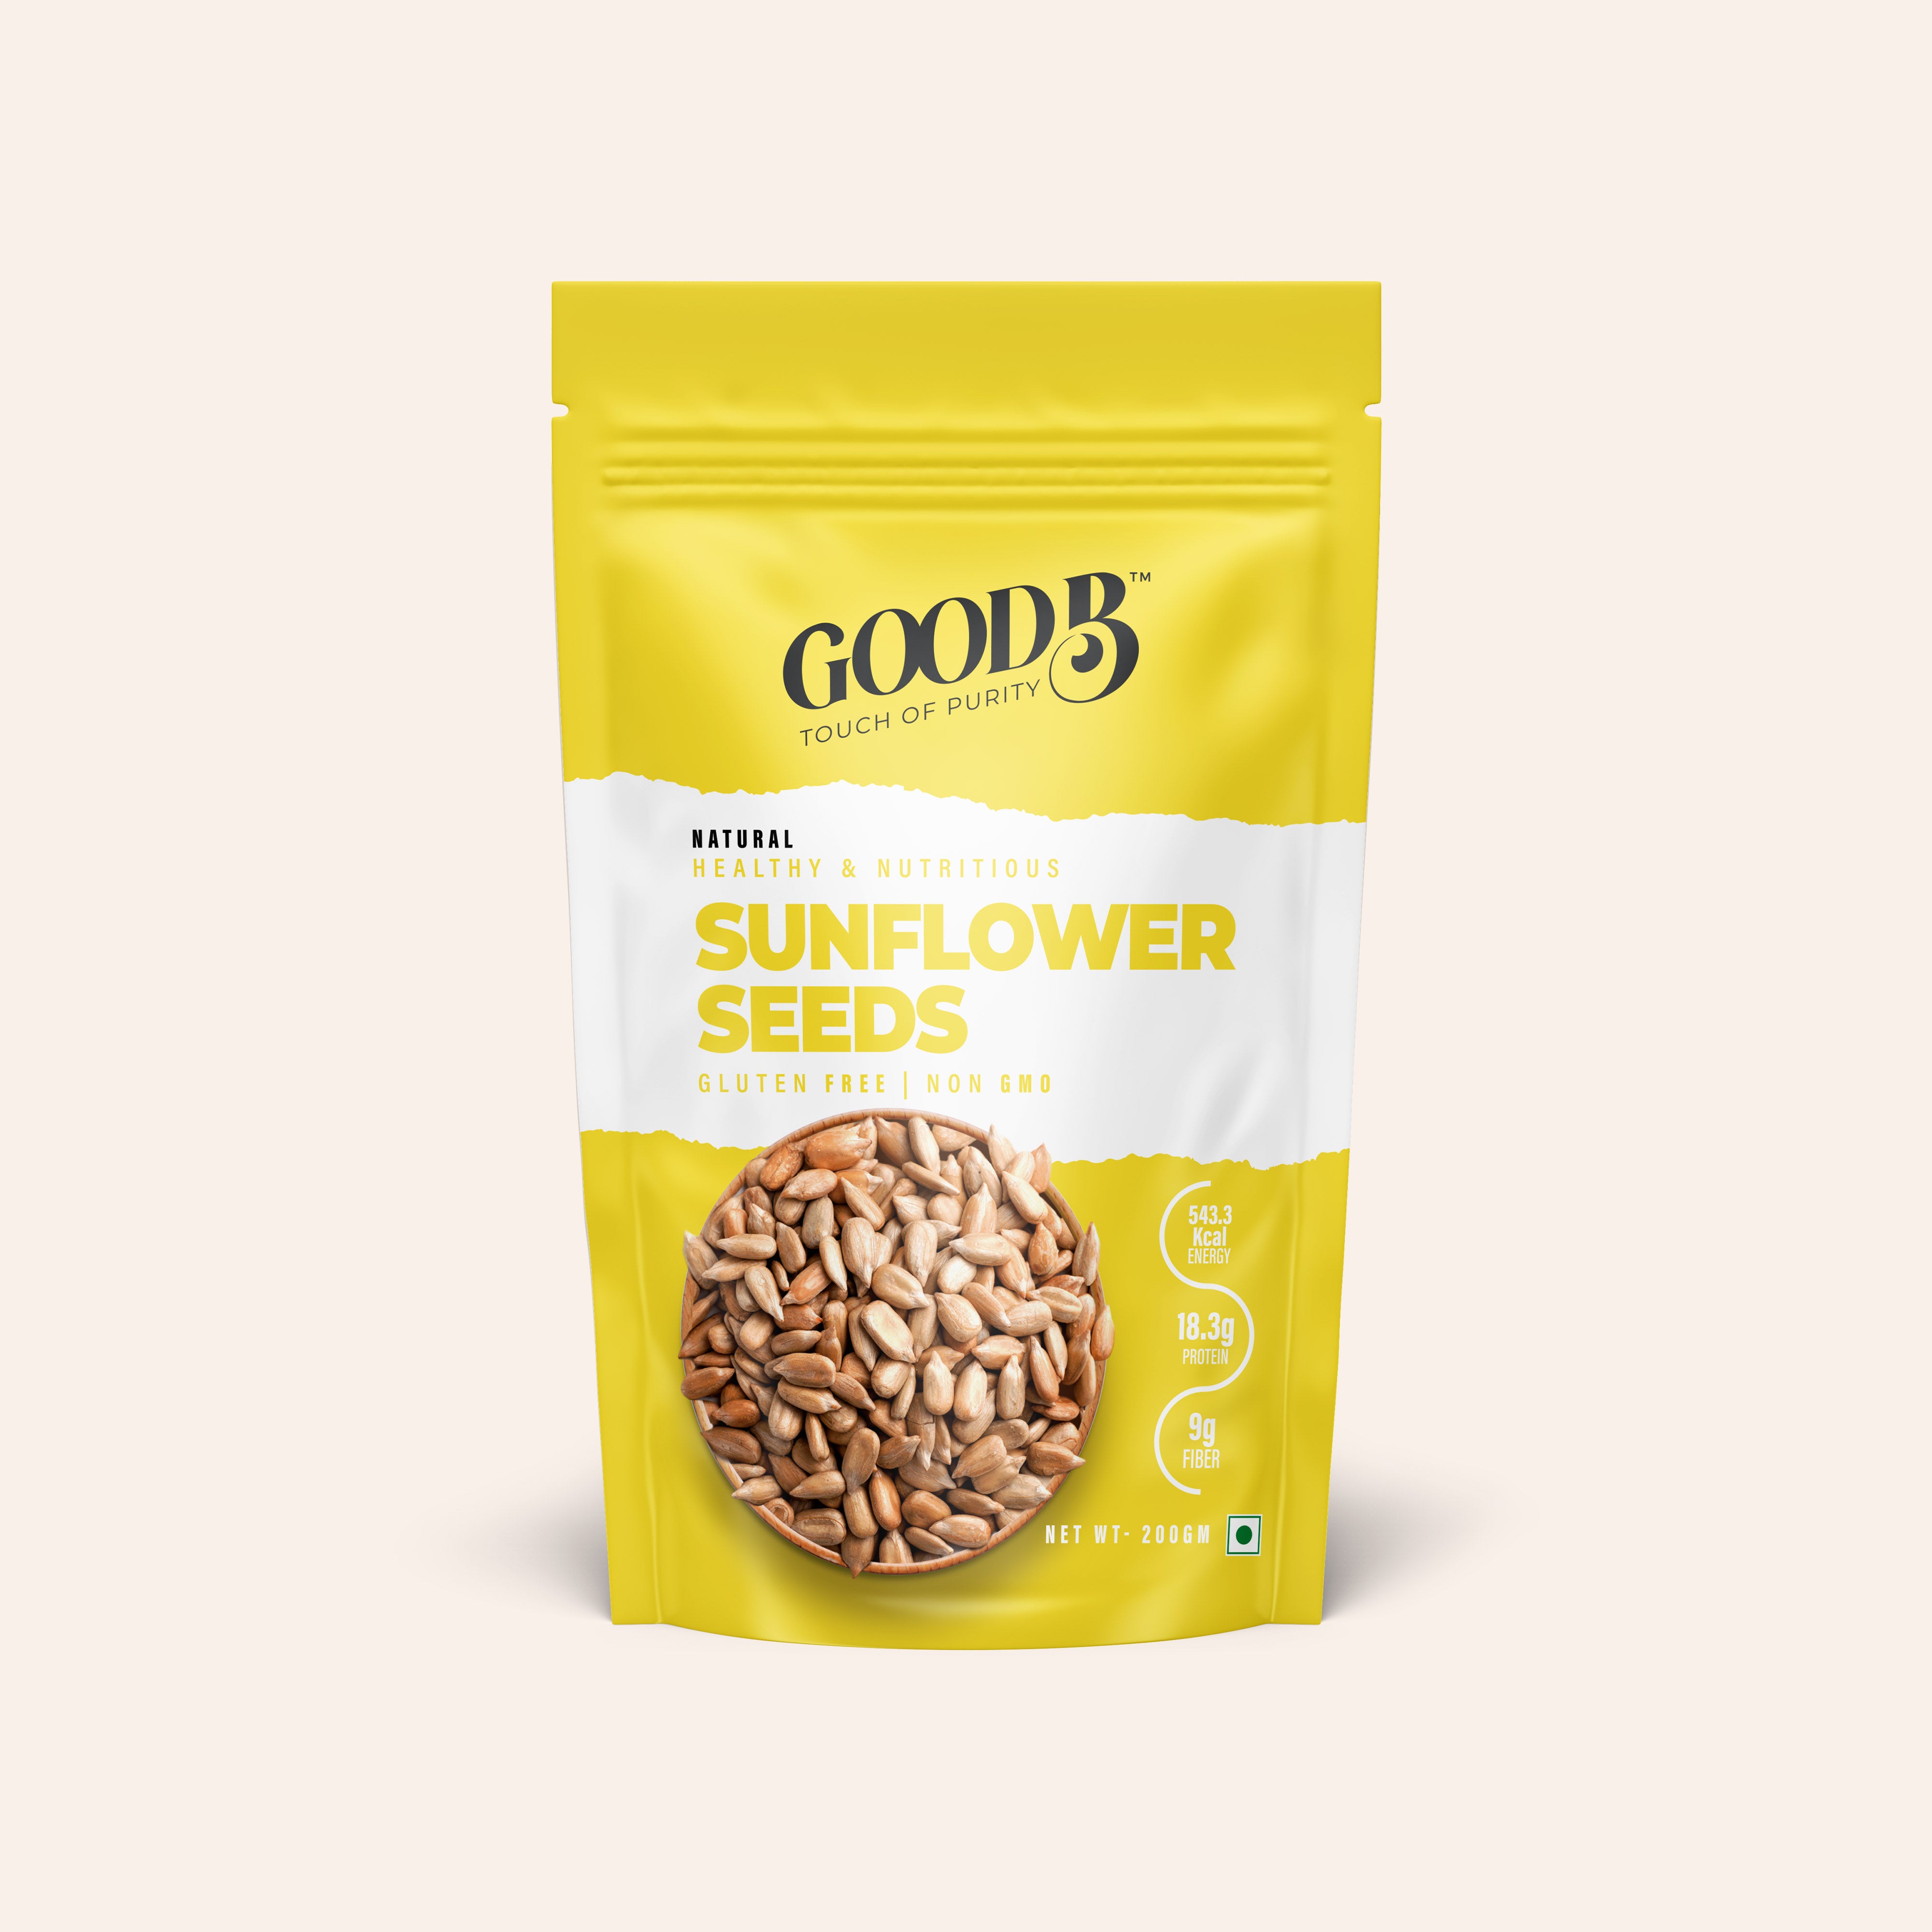 RAW SUNFLOWER SEEDS FOR EATING - 200 GM